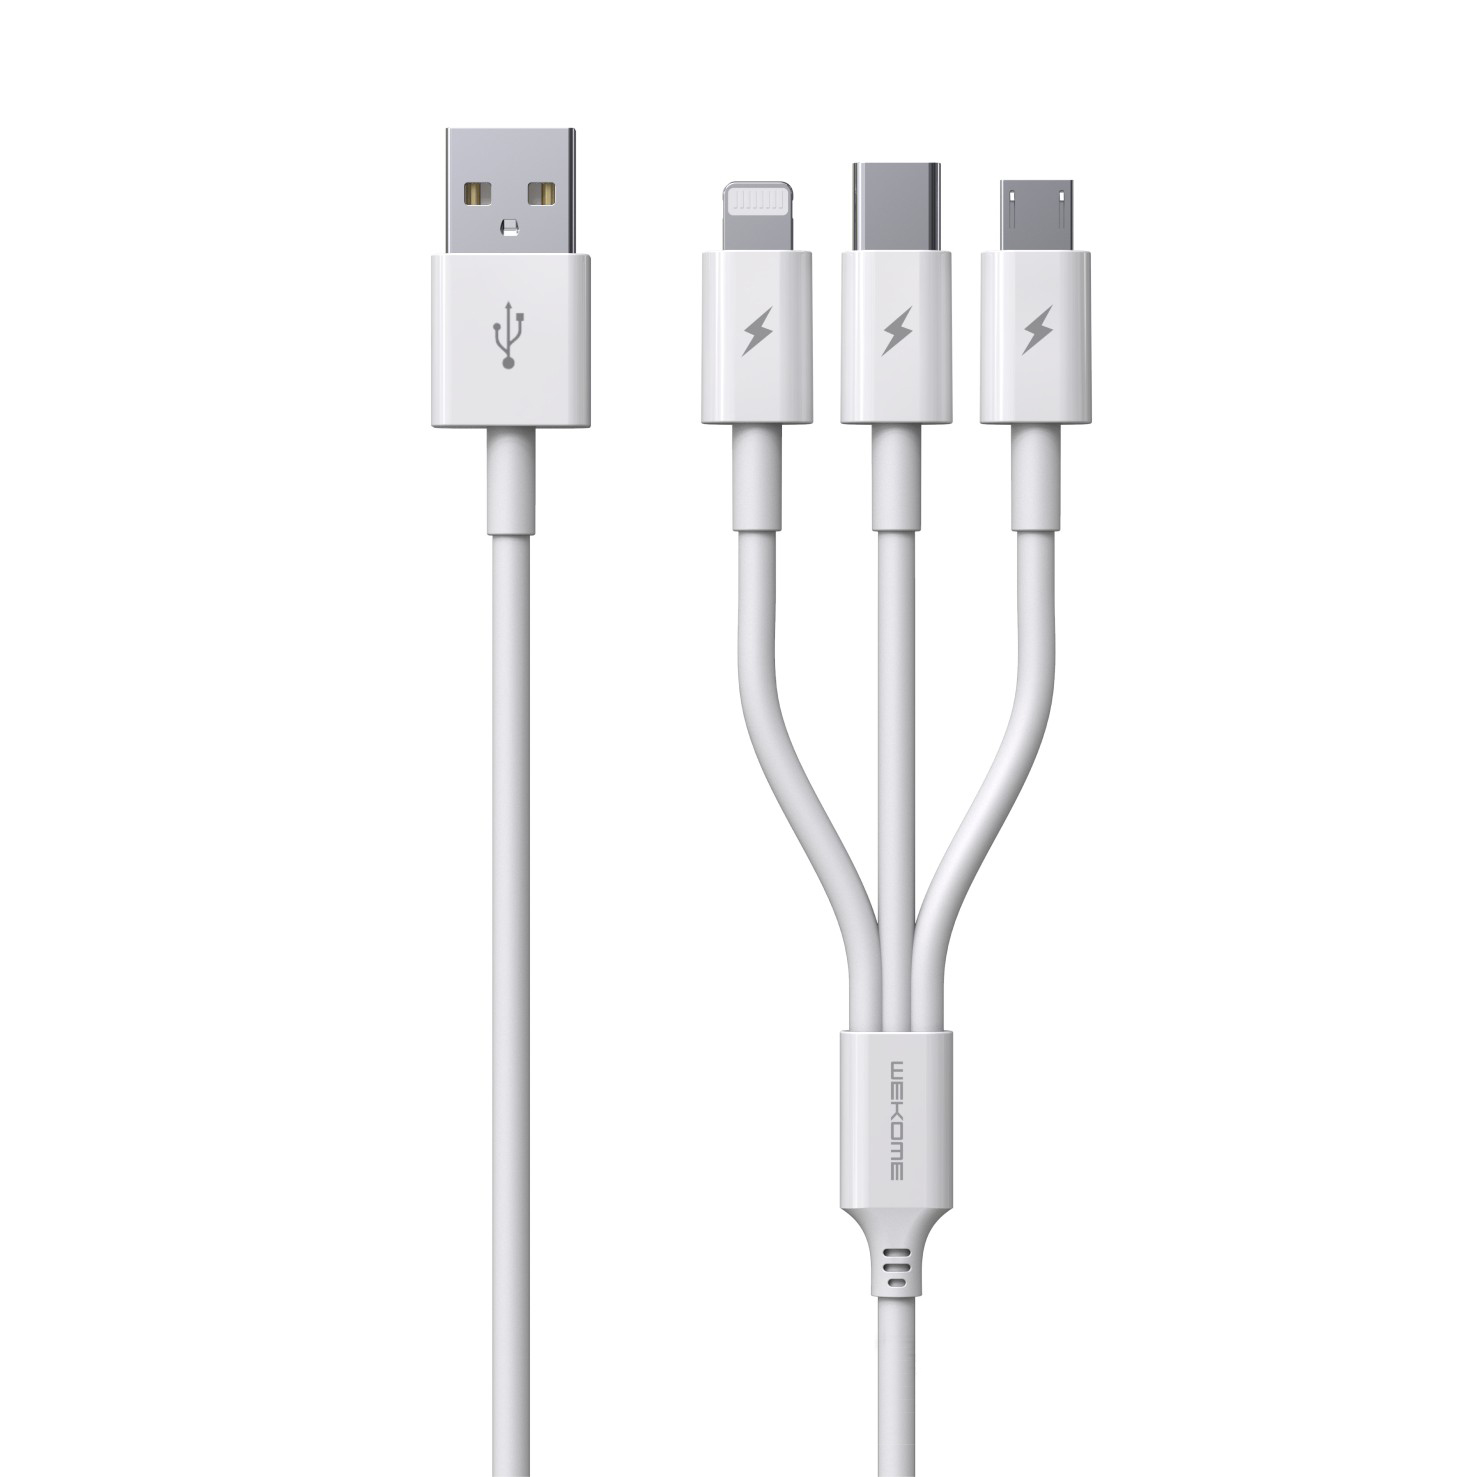 WEKOME iDeal Series 5A Max 3 in 1 TPE Charging Cable